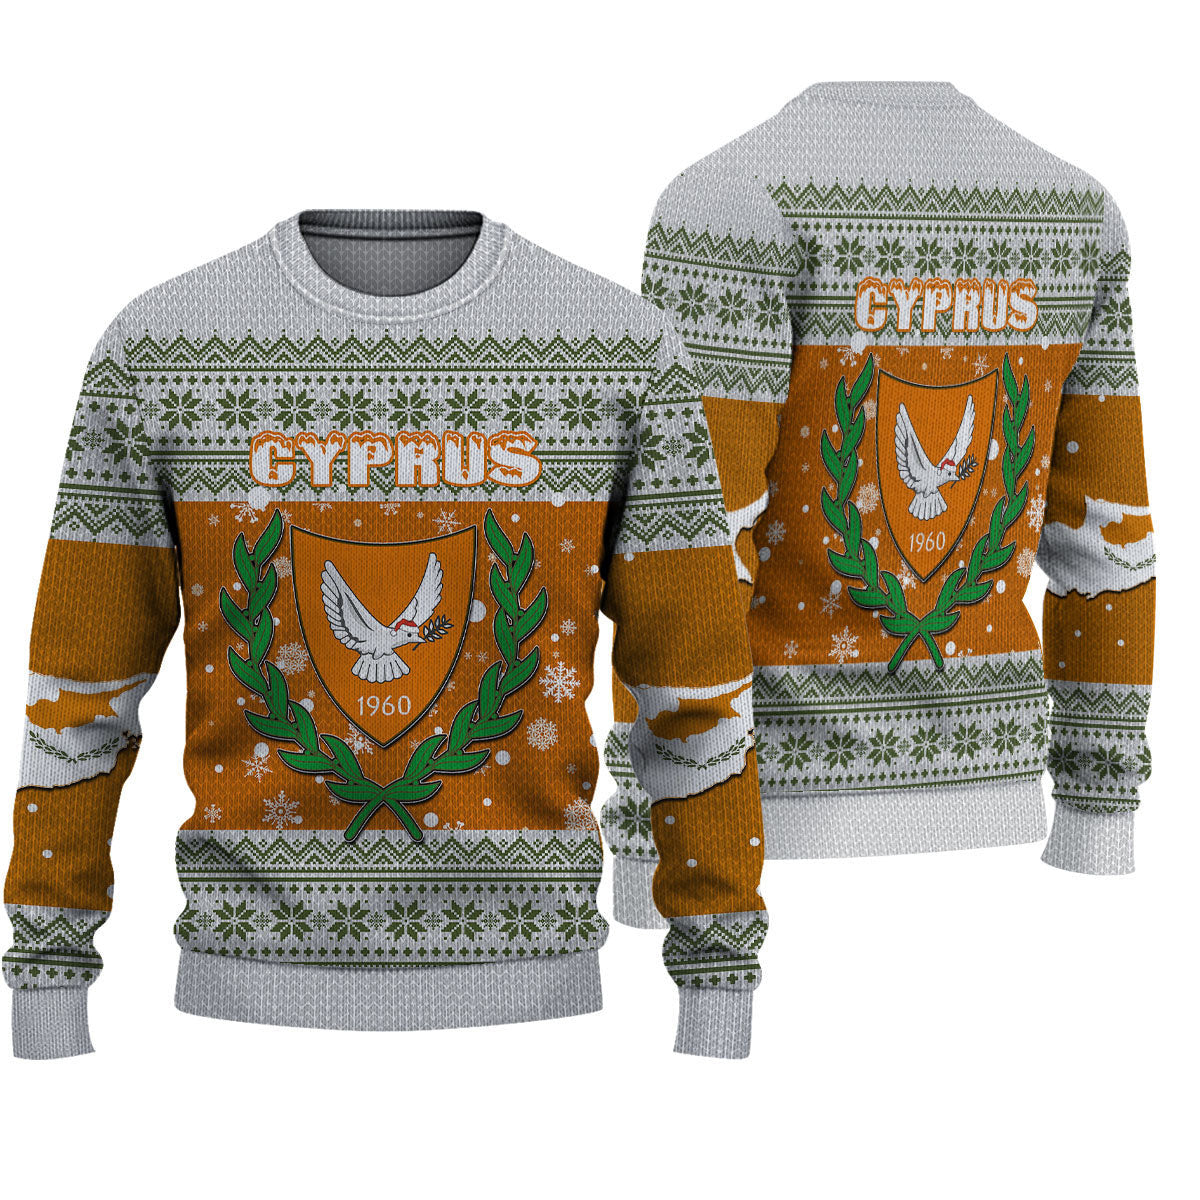 wonder-print-shop-ugly-sweater-cyprus-christmas-knitted-sweater